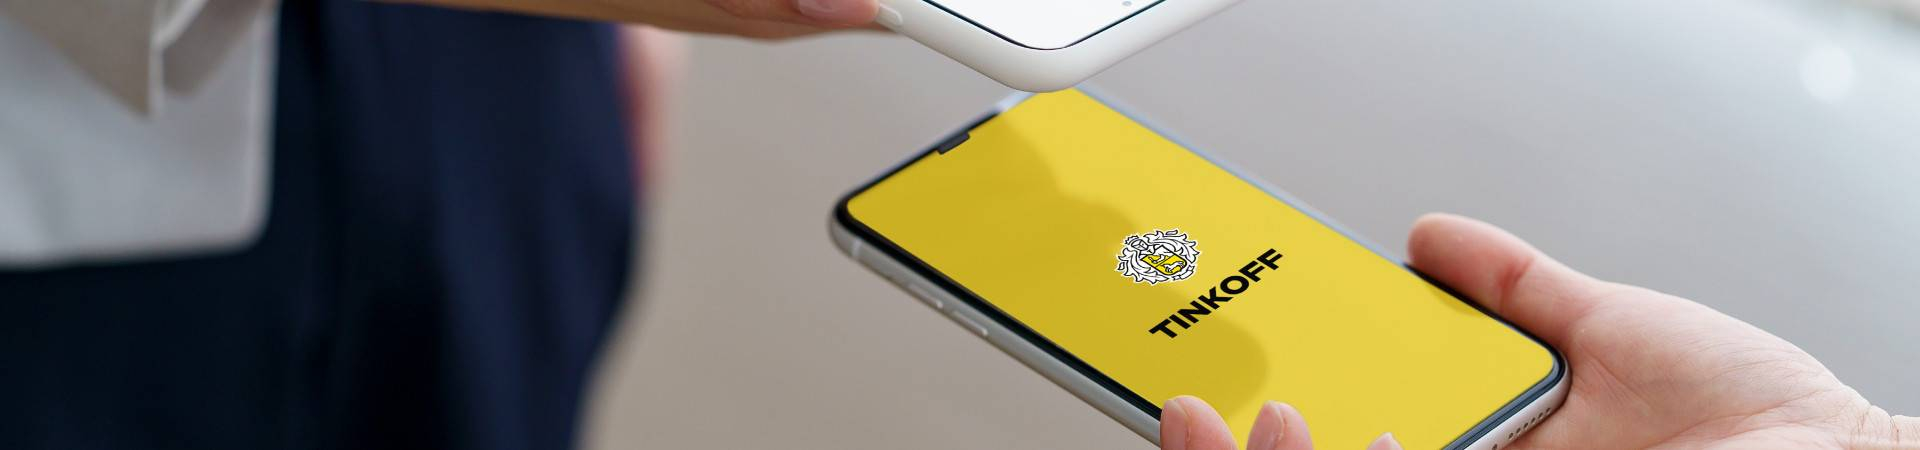 Receiving money from Tinkoff Bank by phone number